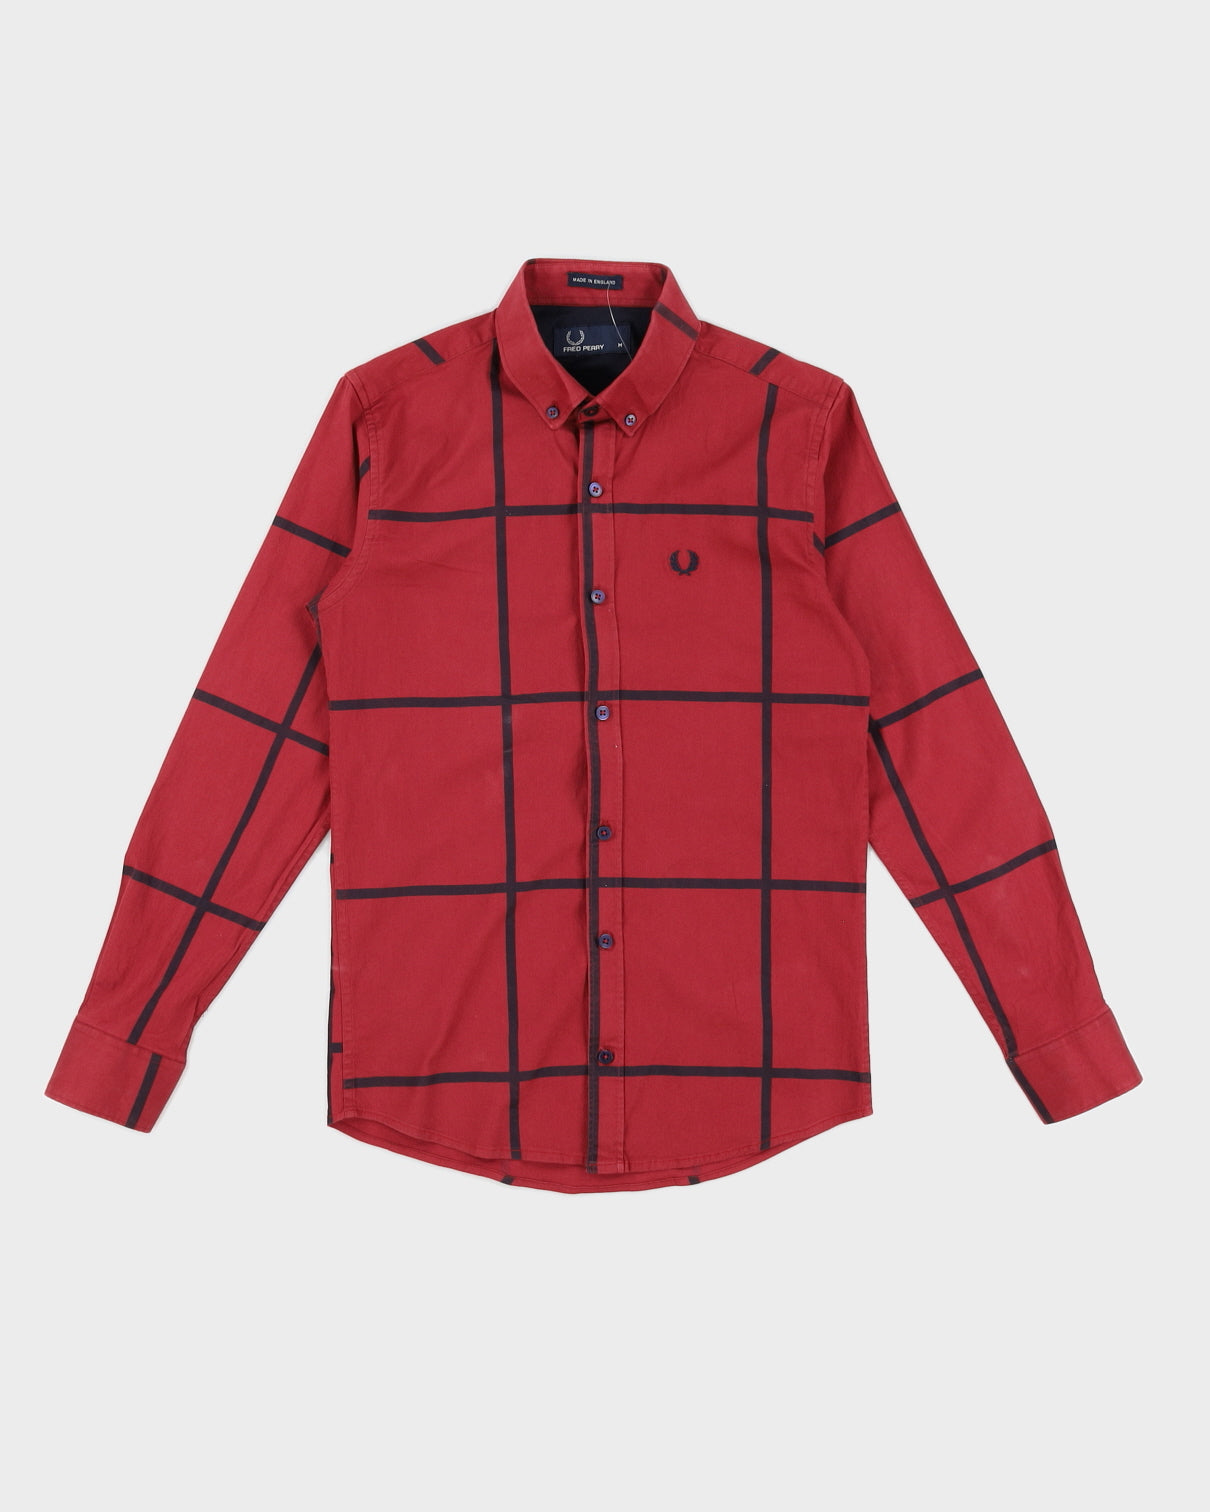 Red and Black Fred Perry Shirt - M